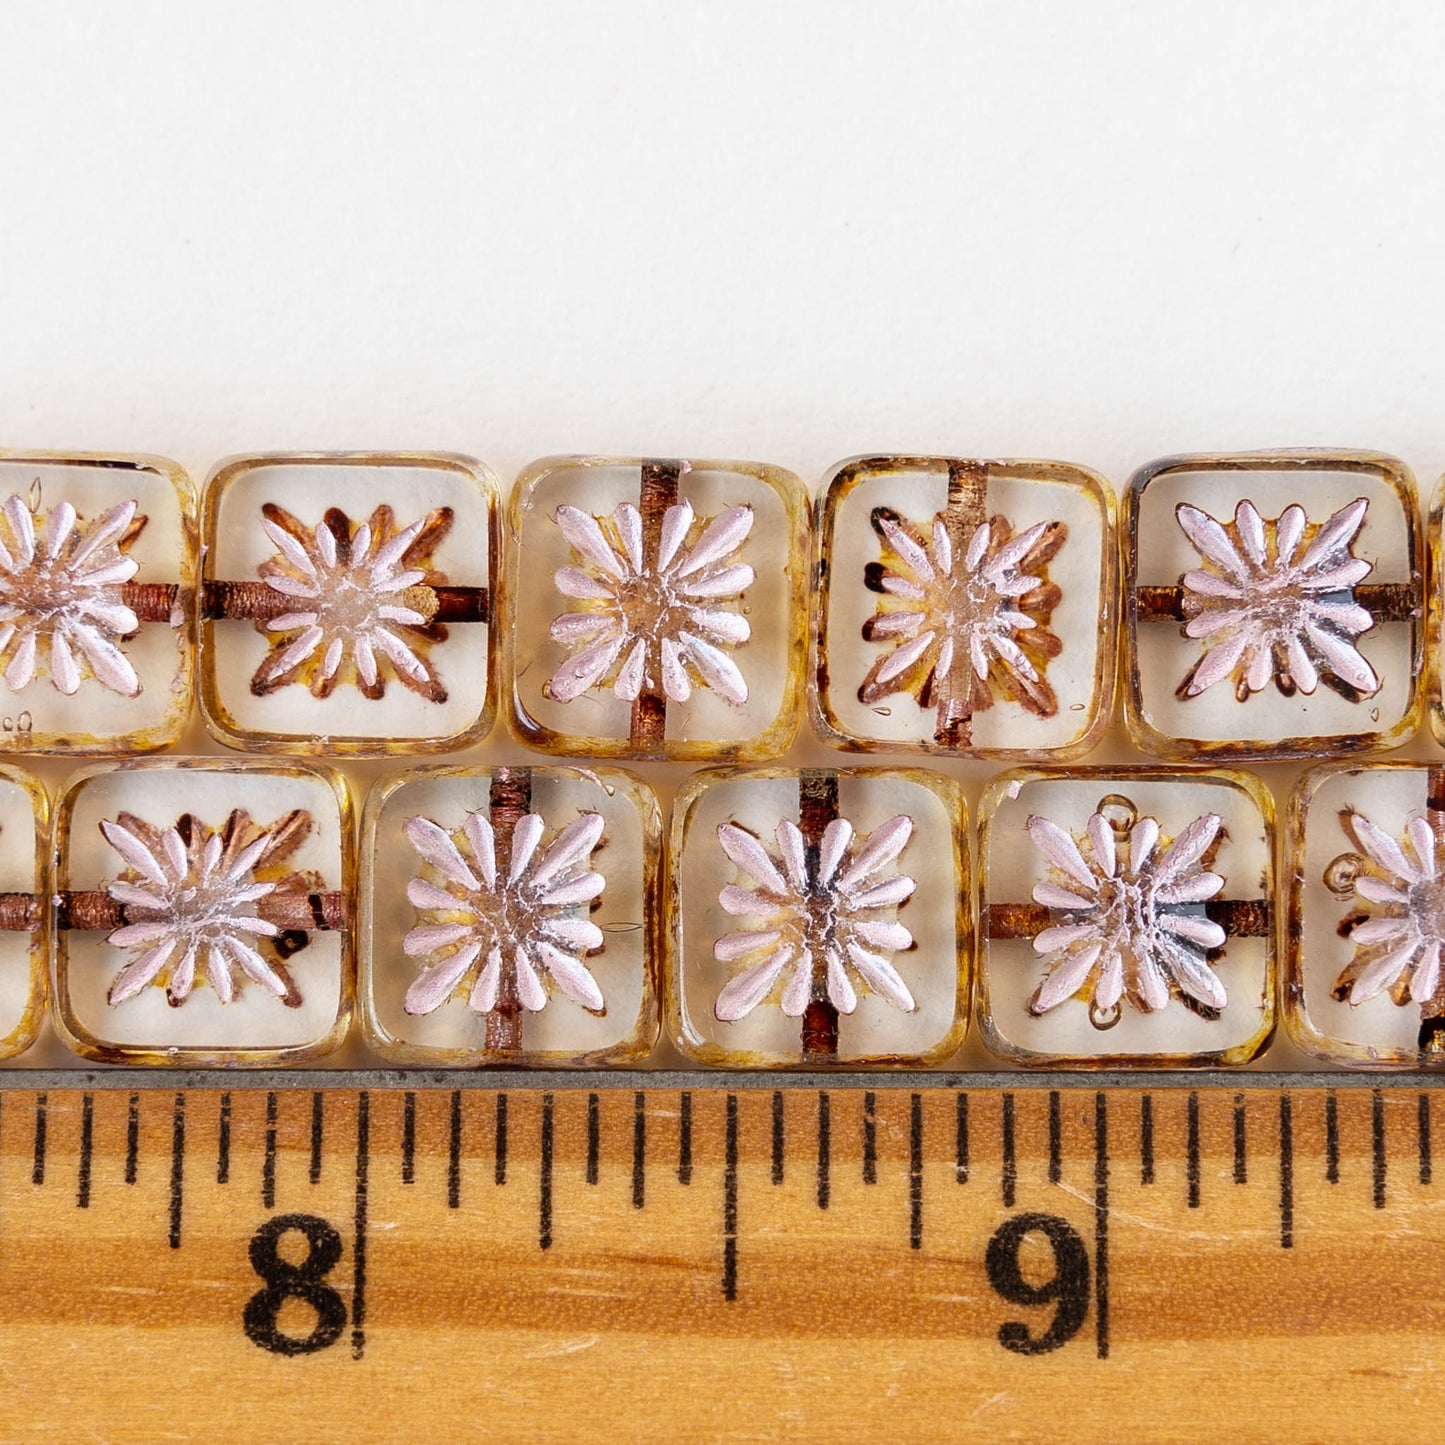 10mm Glass Tile Beads - Crystal with Light Pink Wash - 10 or 30